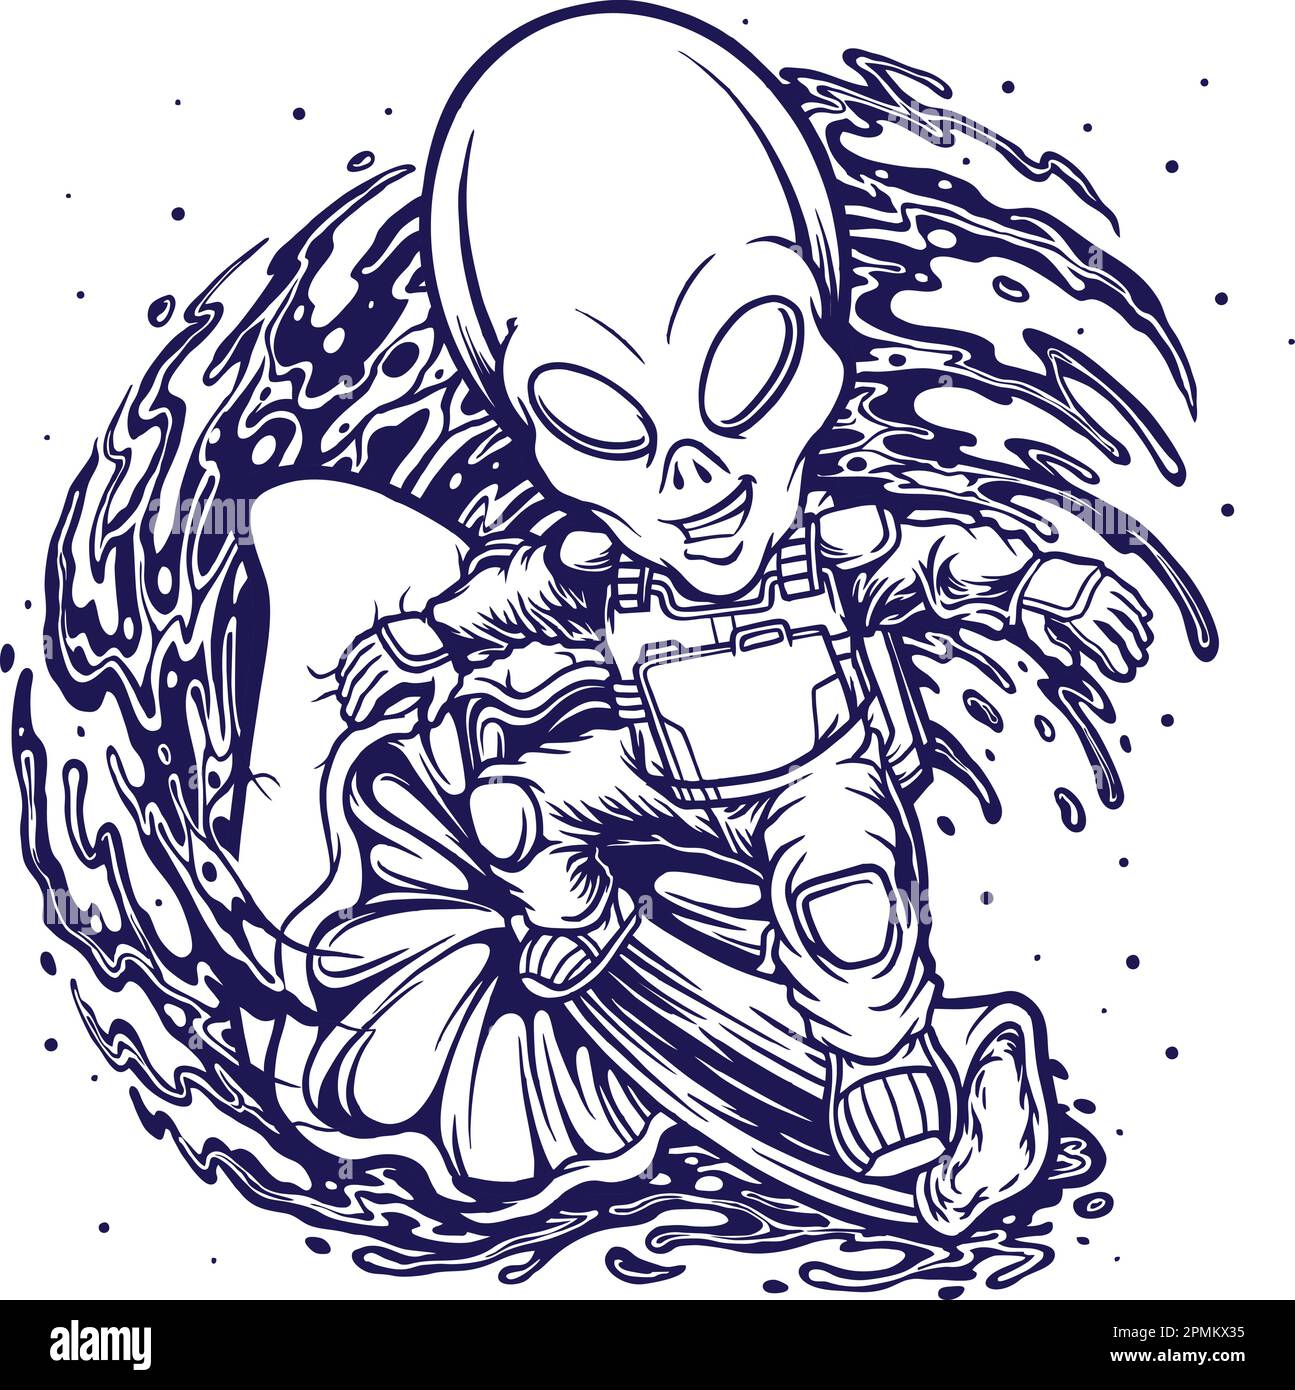 Astronaut alien surfing with psychedelic magic mushrooms mascot illustrations monochrome vector for your work logo, merchandise t-shirt, stickers Stock Vector